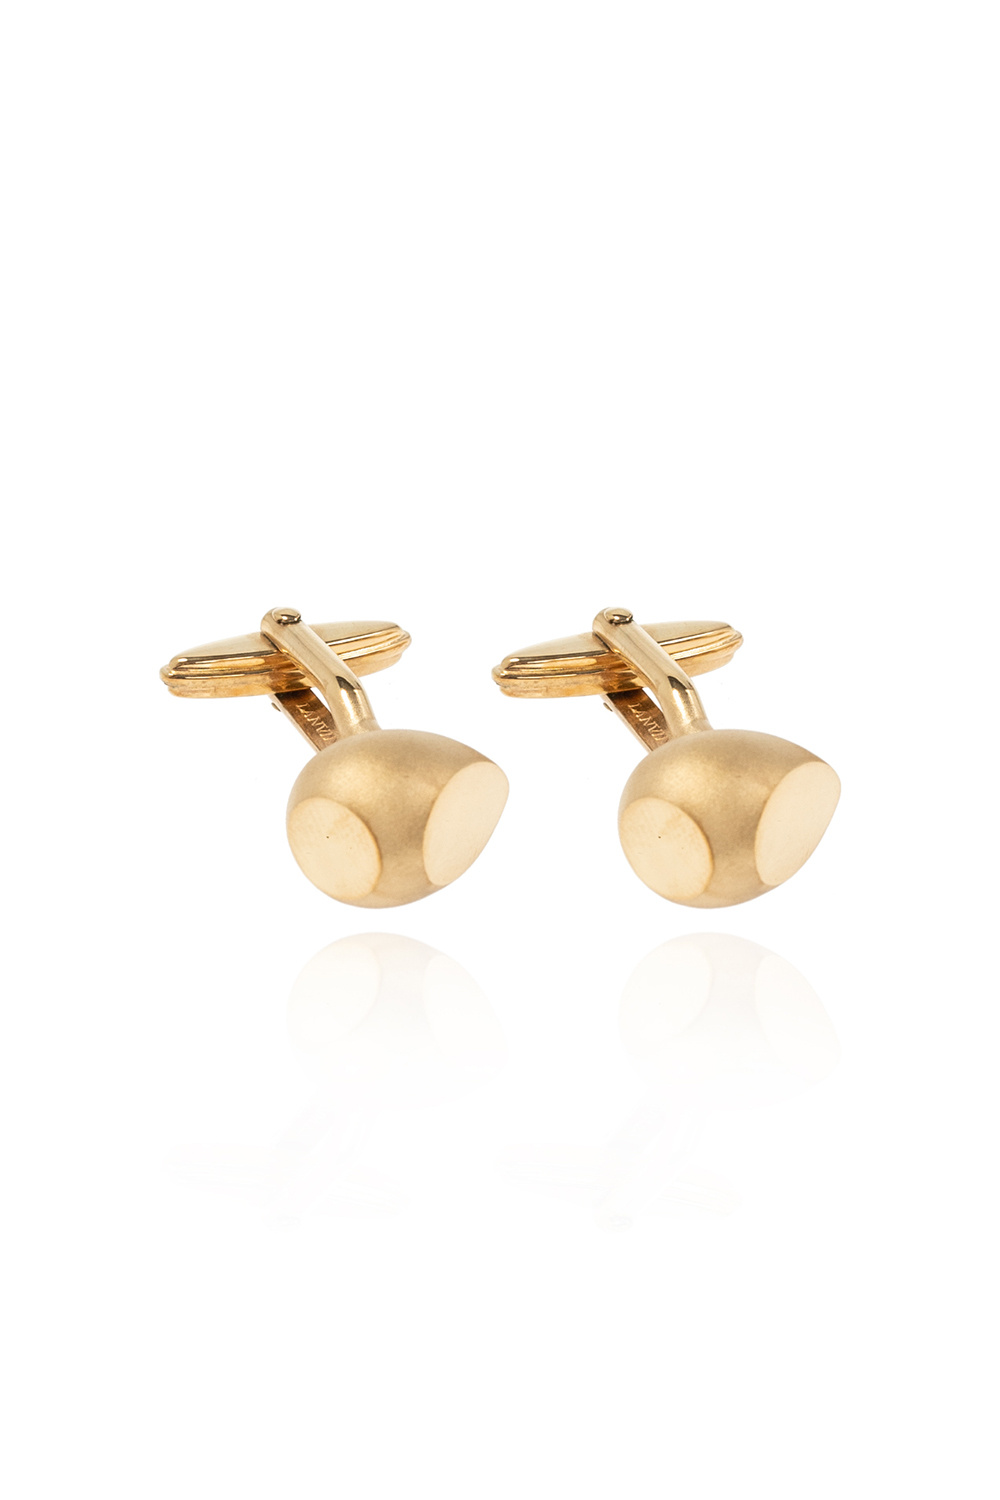 Lanvin Cuff links with logo